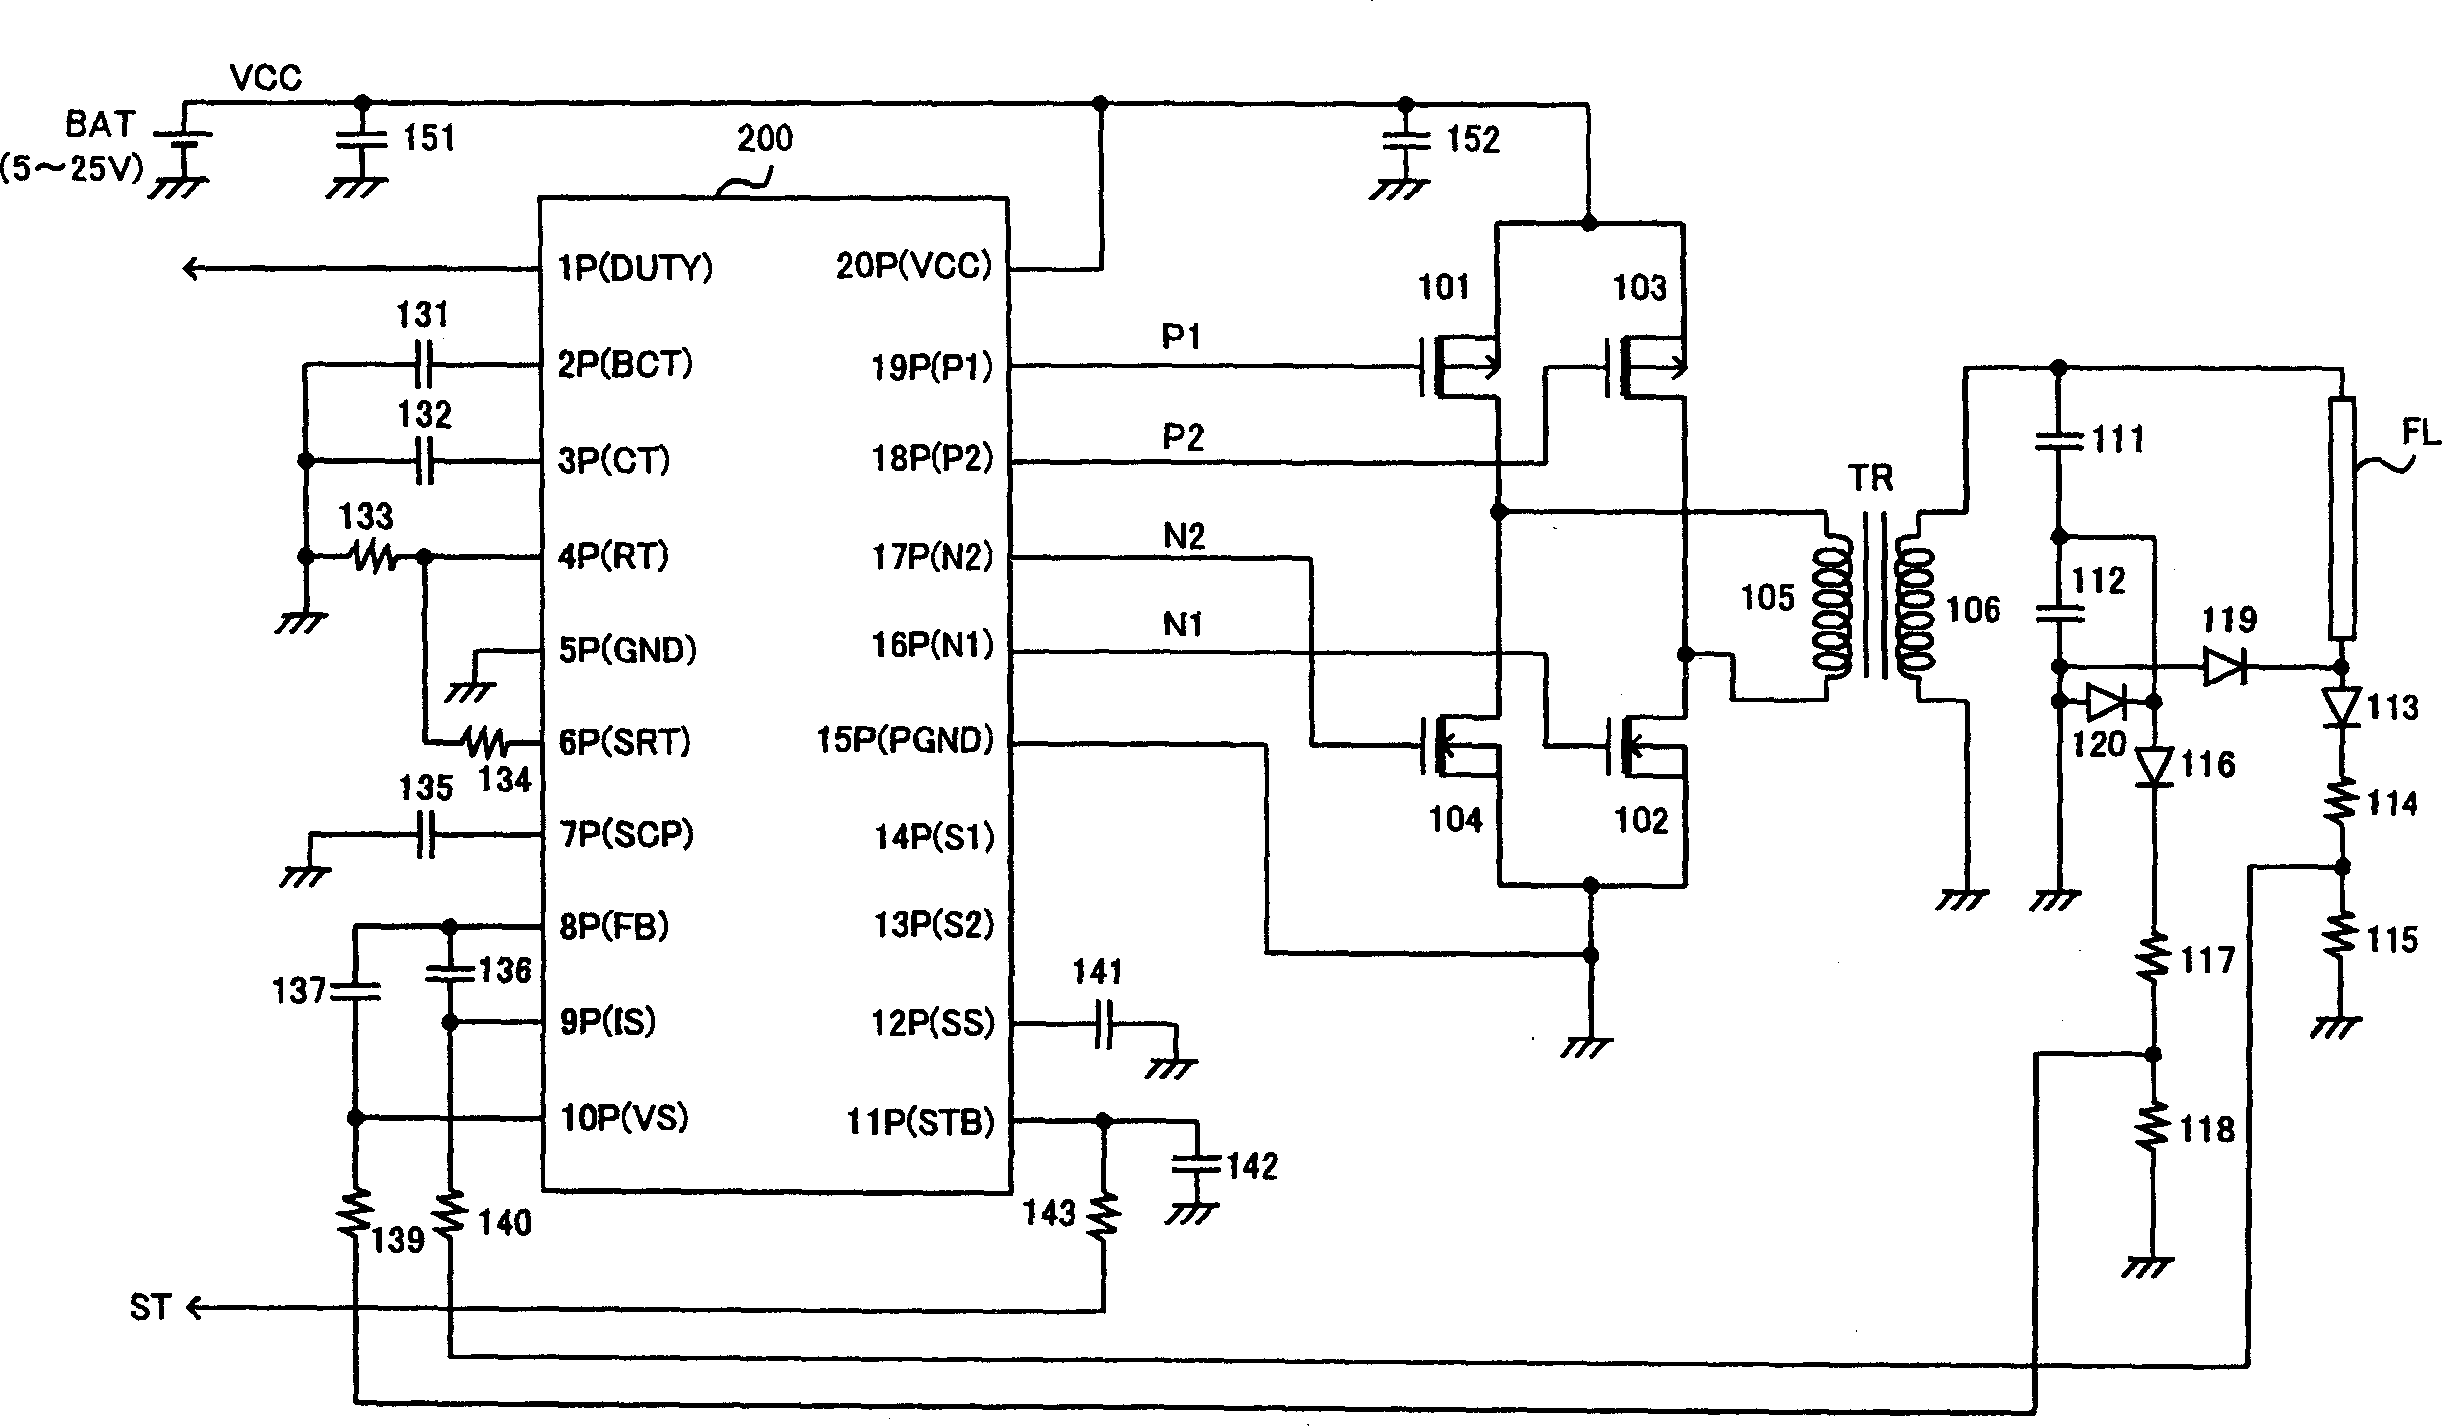 DC-AC transformer and controller IC thereof